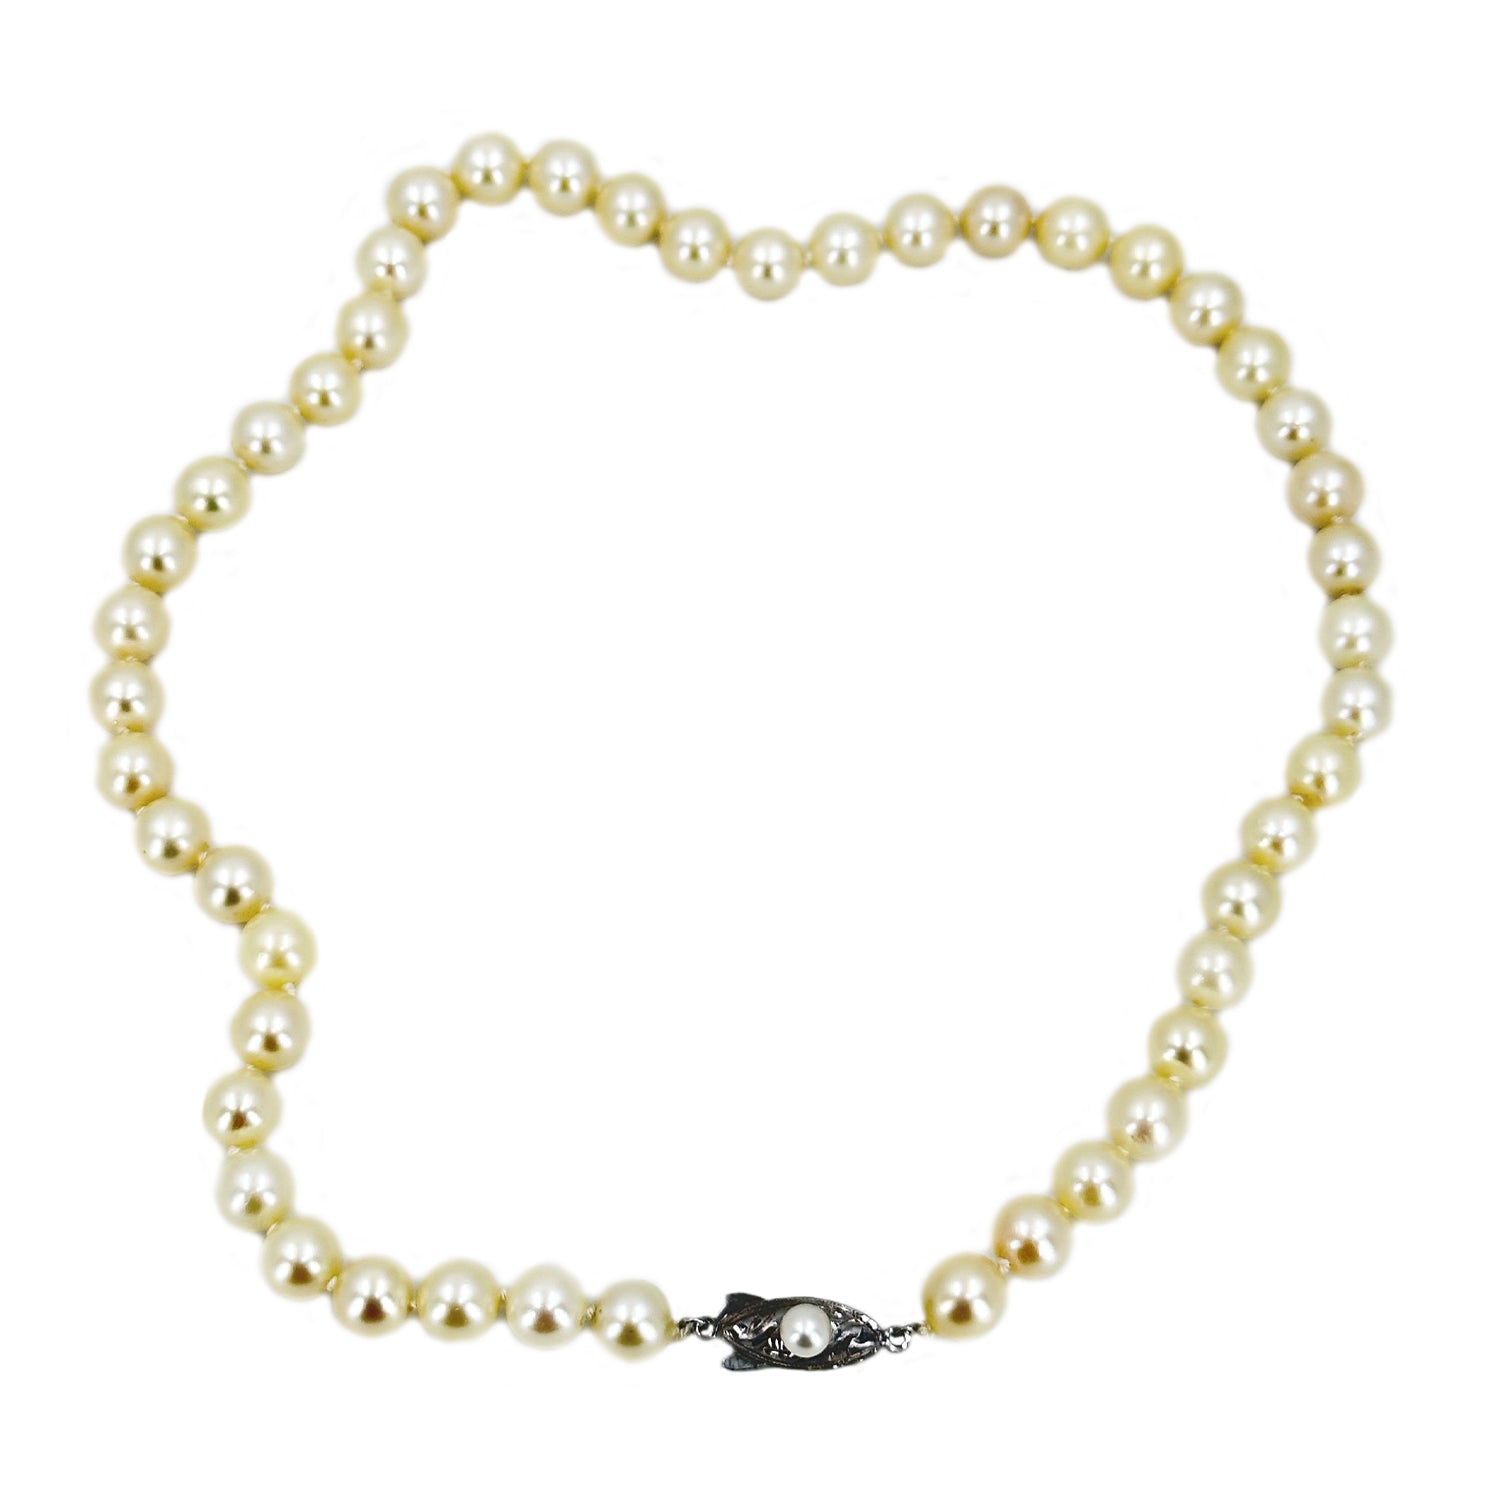 Vintage Cream Choker Japanese Saltwater Cultured Akoya Pearl Necklace - Sterling Silver 15.50 Inch